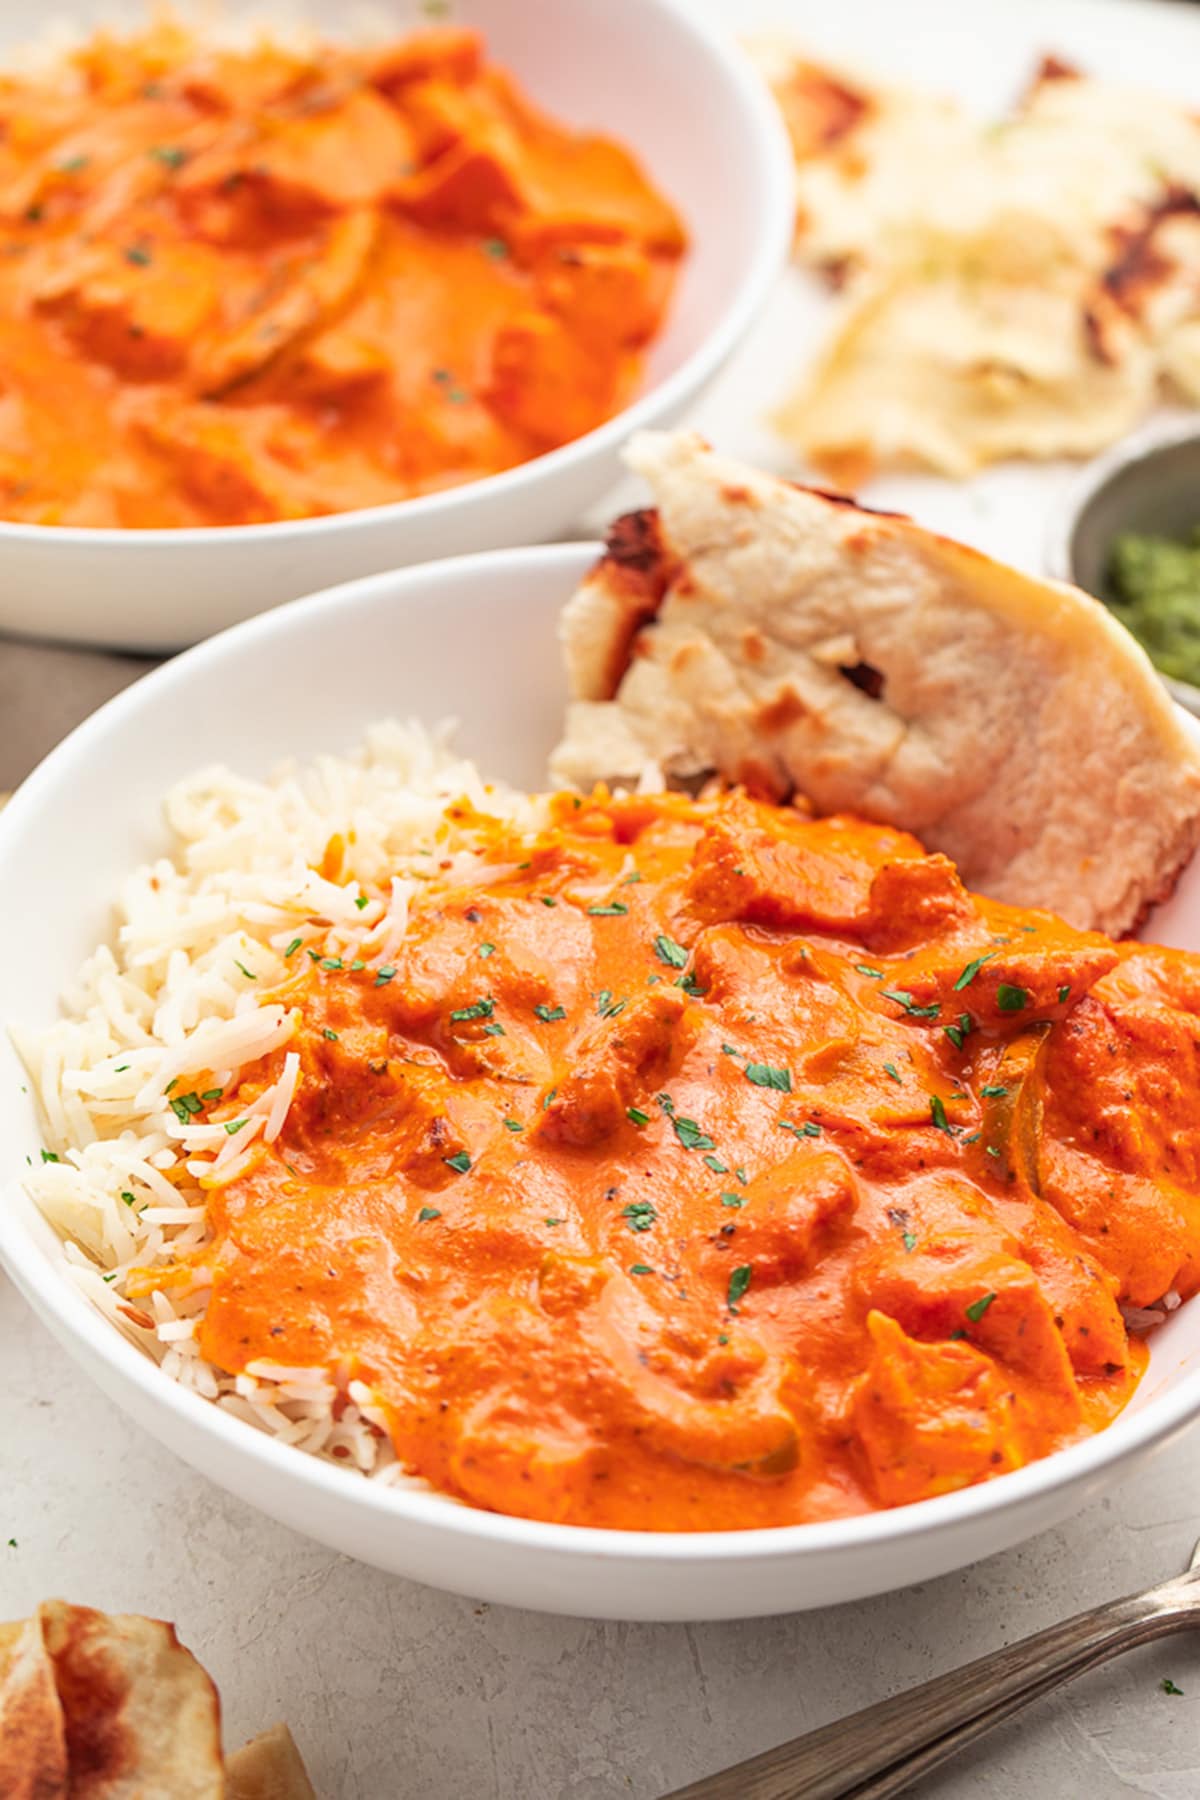 A bowl of chicken tikka masala over basmati rice with a slice of naan.